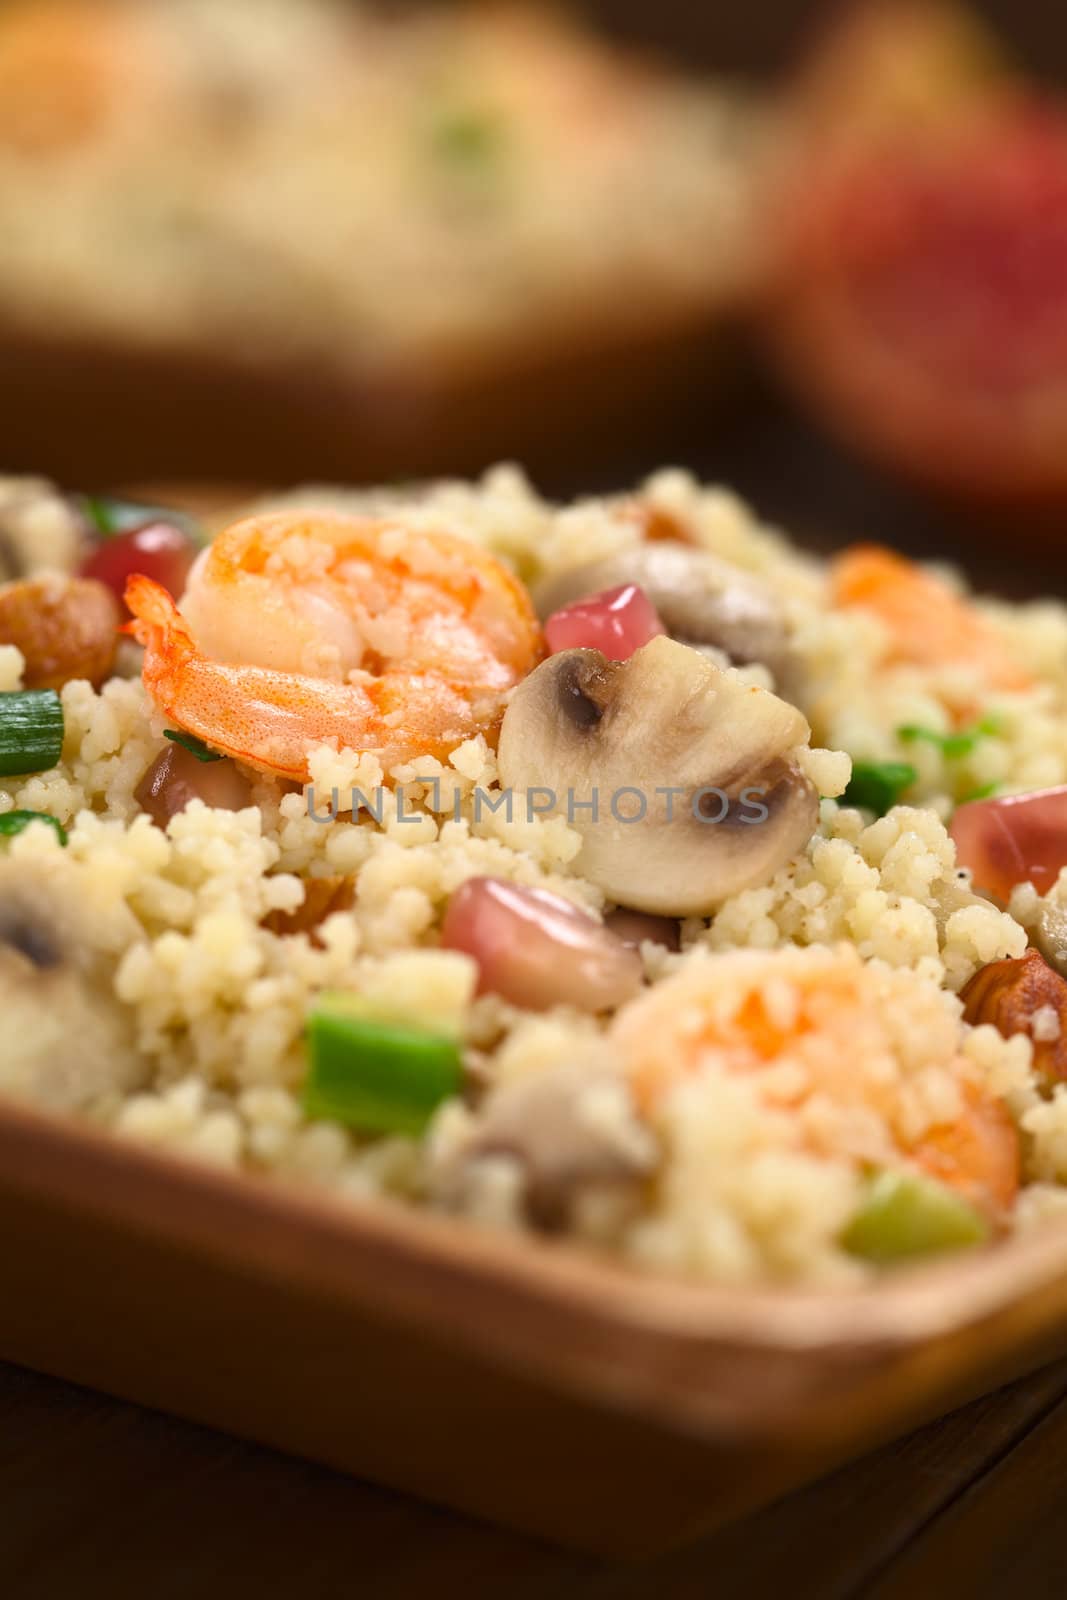 Couscous dish with shrimps, mushroom, almond, pomegranate seeds and green onion served on wooden plate (Selective Focus, Focus on the tail of the shrimp on the top of the meal and on the upper part of the mushroom slice next to it) 